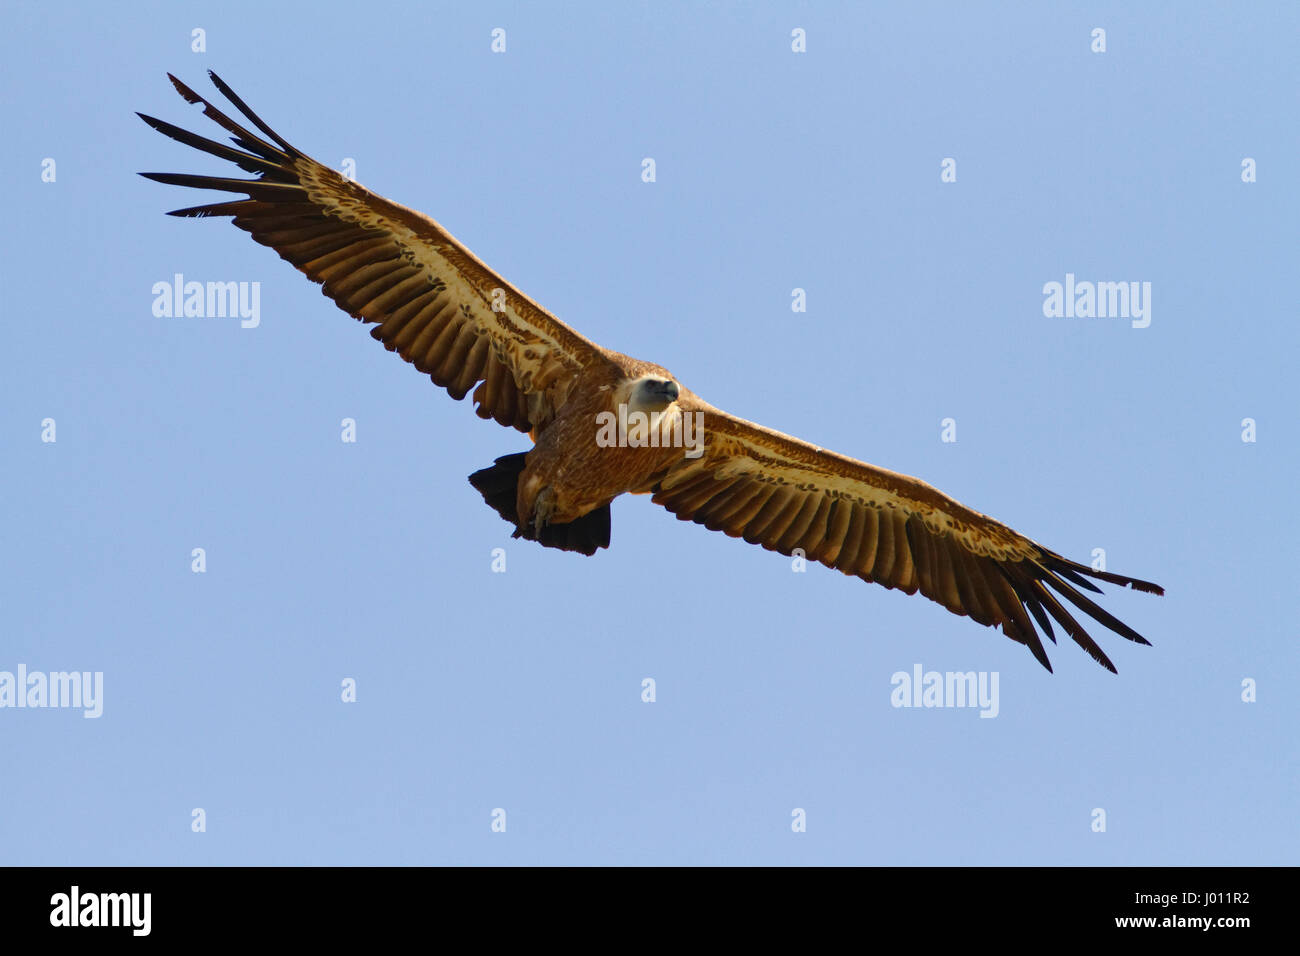 The griffon vulture in flight against blue sky on Cres island Stock Photo